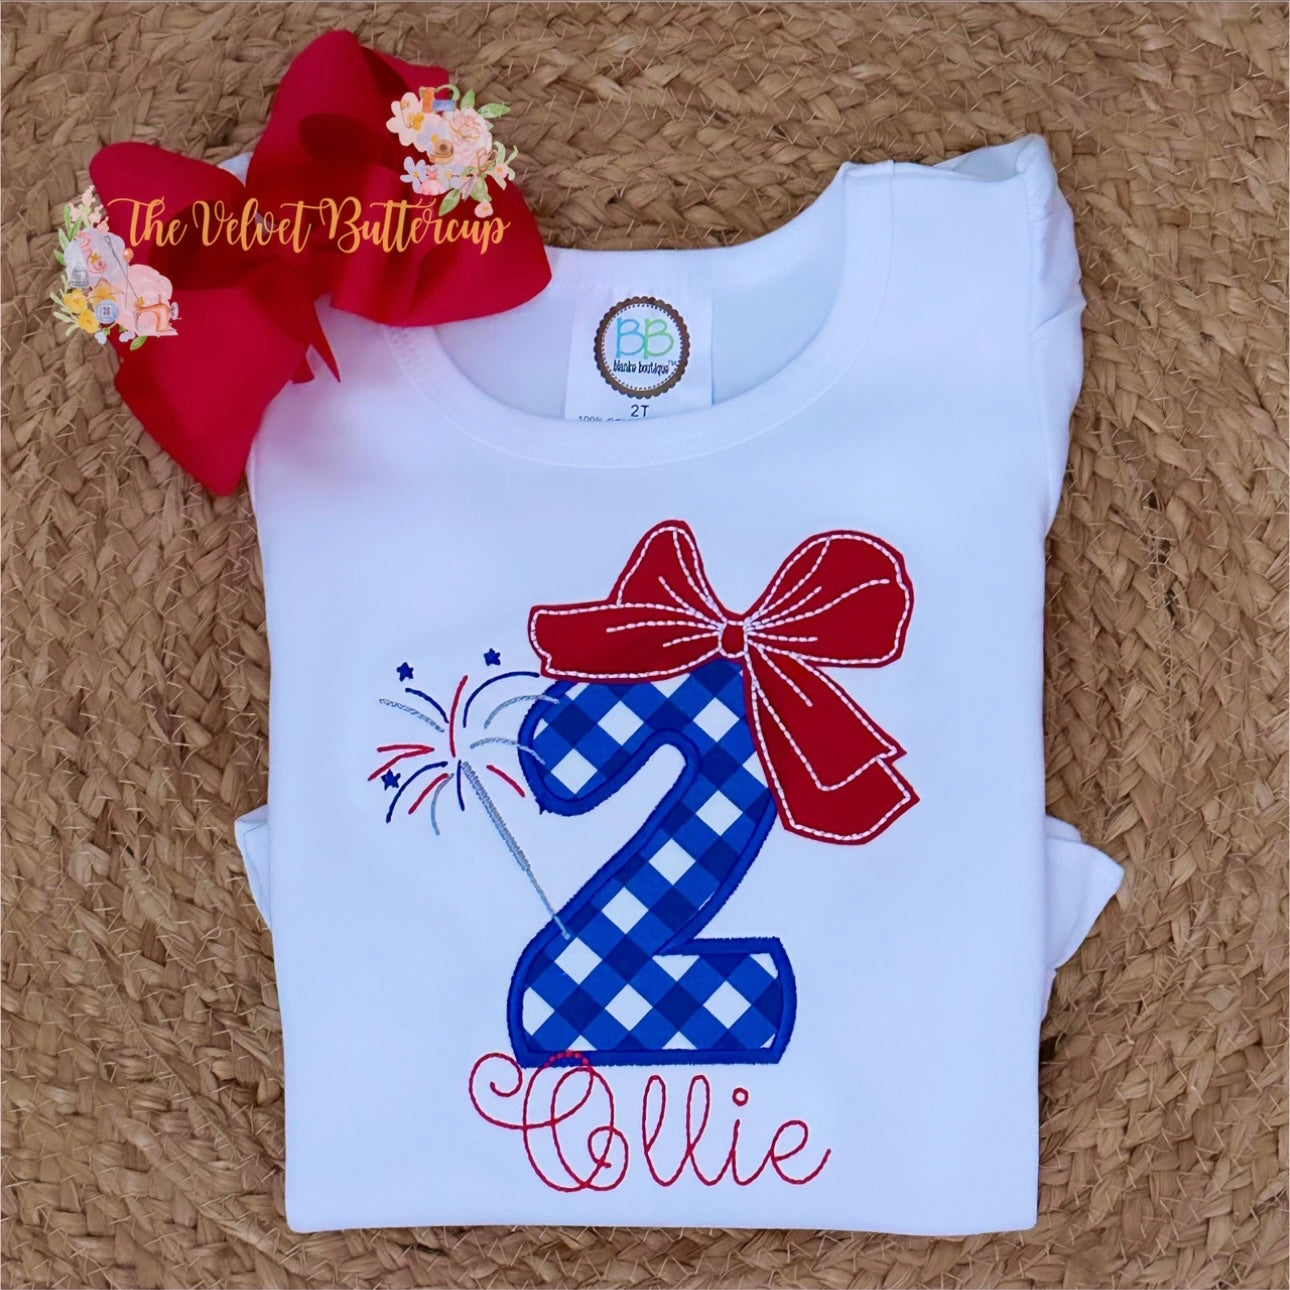 Red White and Blue Birthday Appliqué Shirt